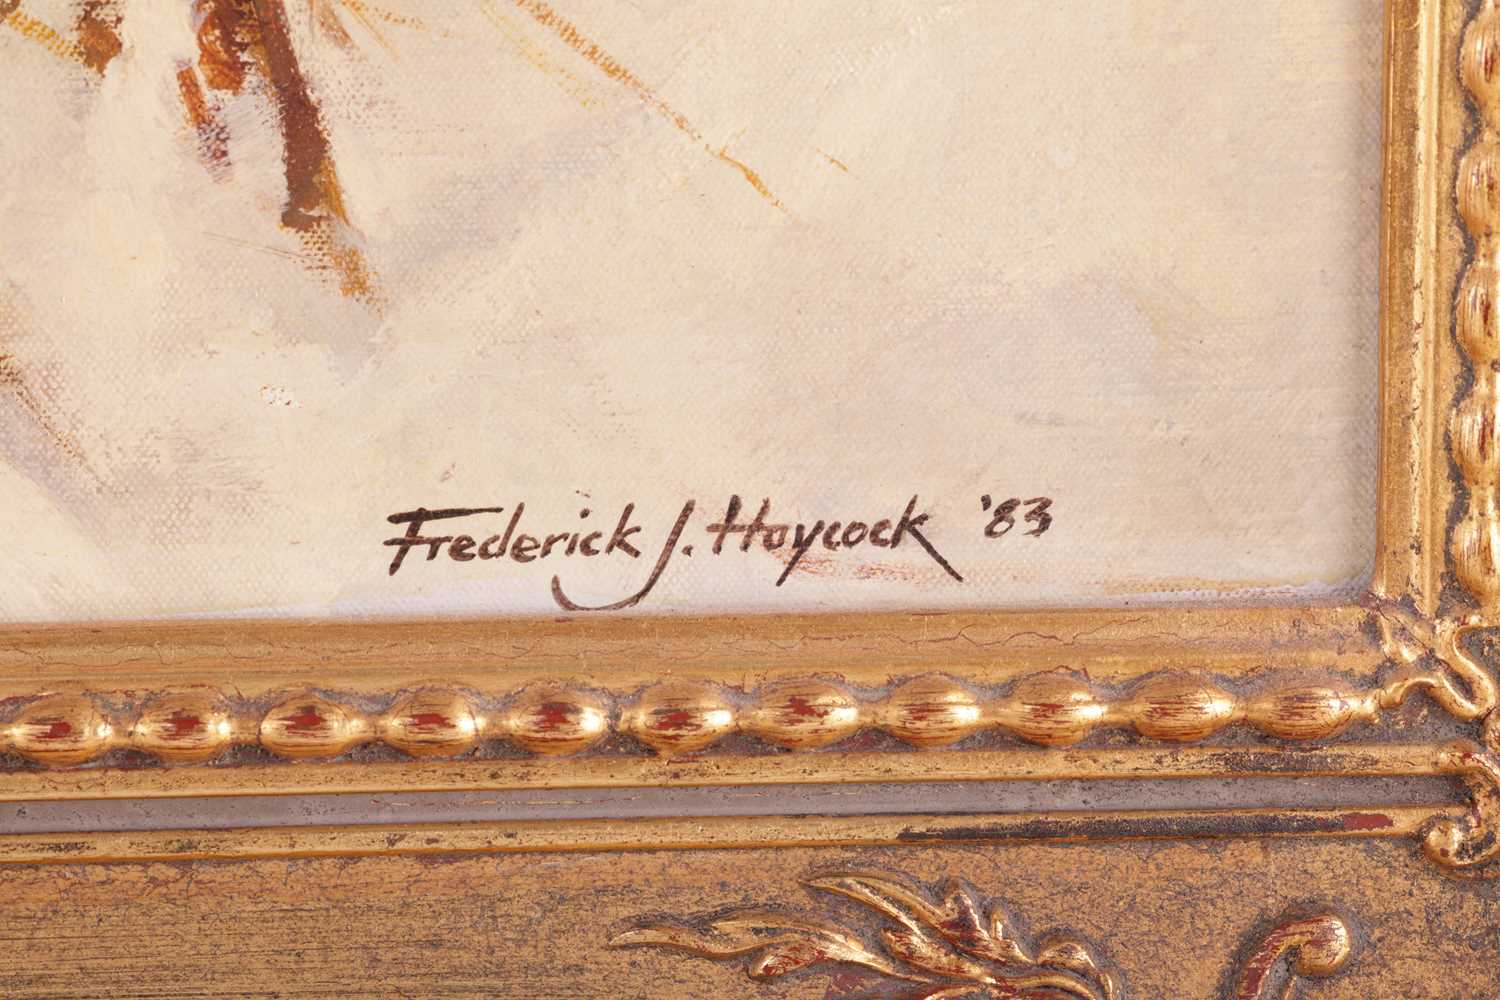 Frederick Haycock (b.1948), 'Cunning and Cautious', signed 'Frederick J. Haycock '83' (lower right), - Image 3 of 8